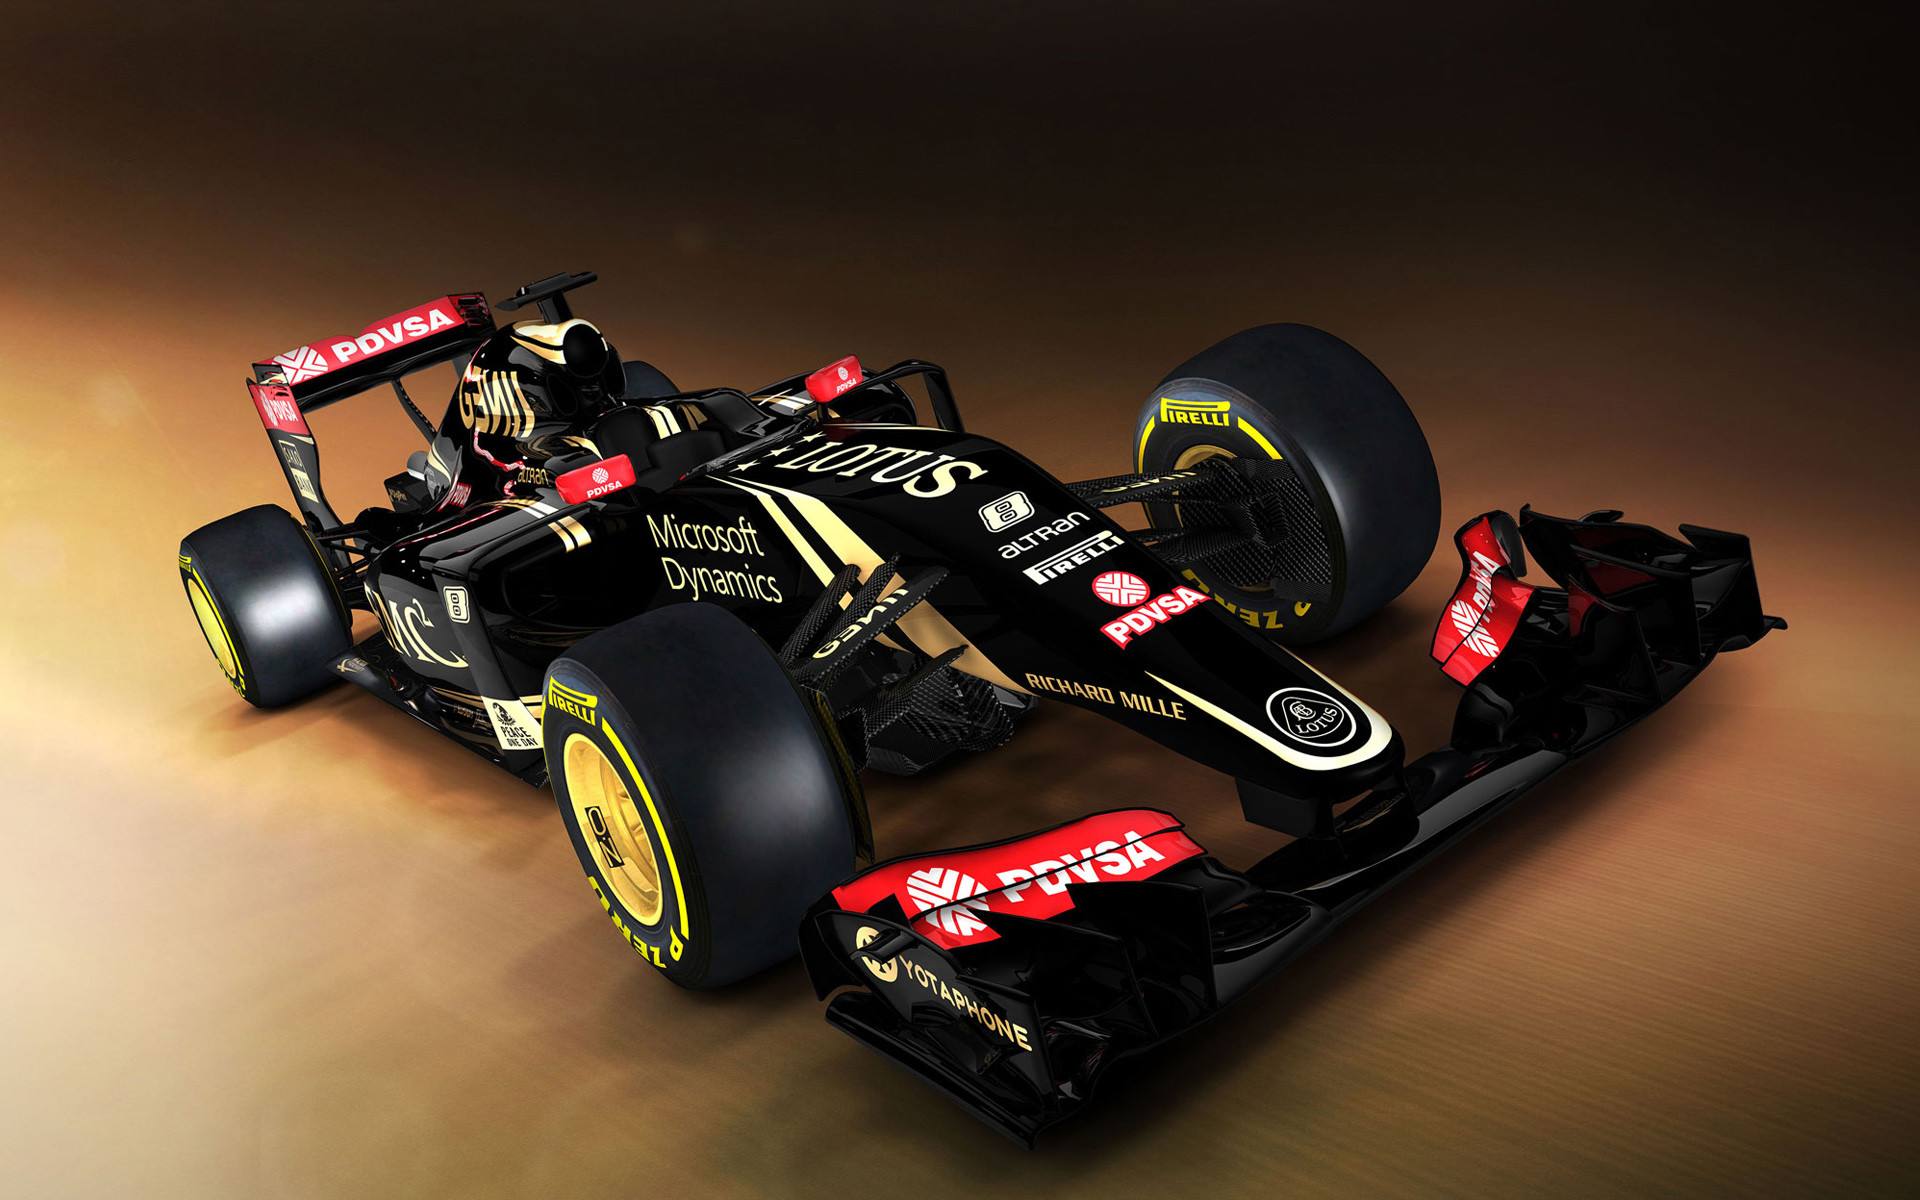 1920x1200 Looking for images of the 2015 Lotus The Hybrid represents a new era for  Lotus Team, not only in the change to a Mercedes Benz Power Unit, but also  it is ...